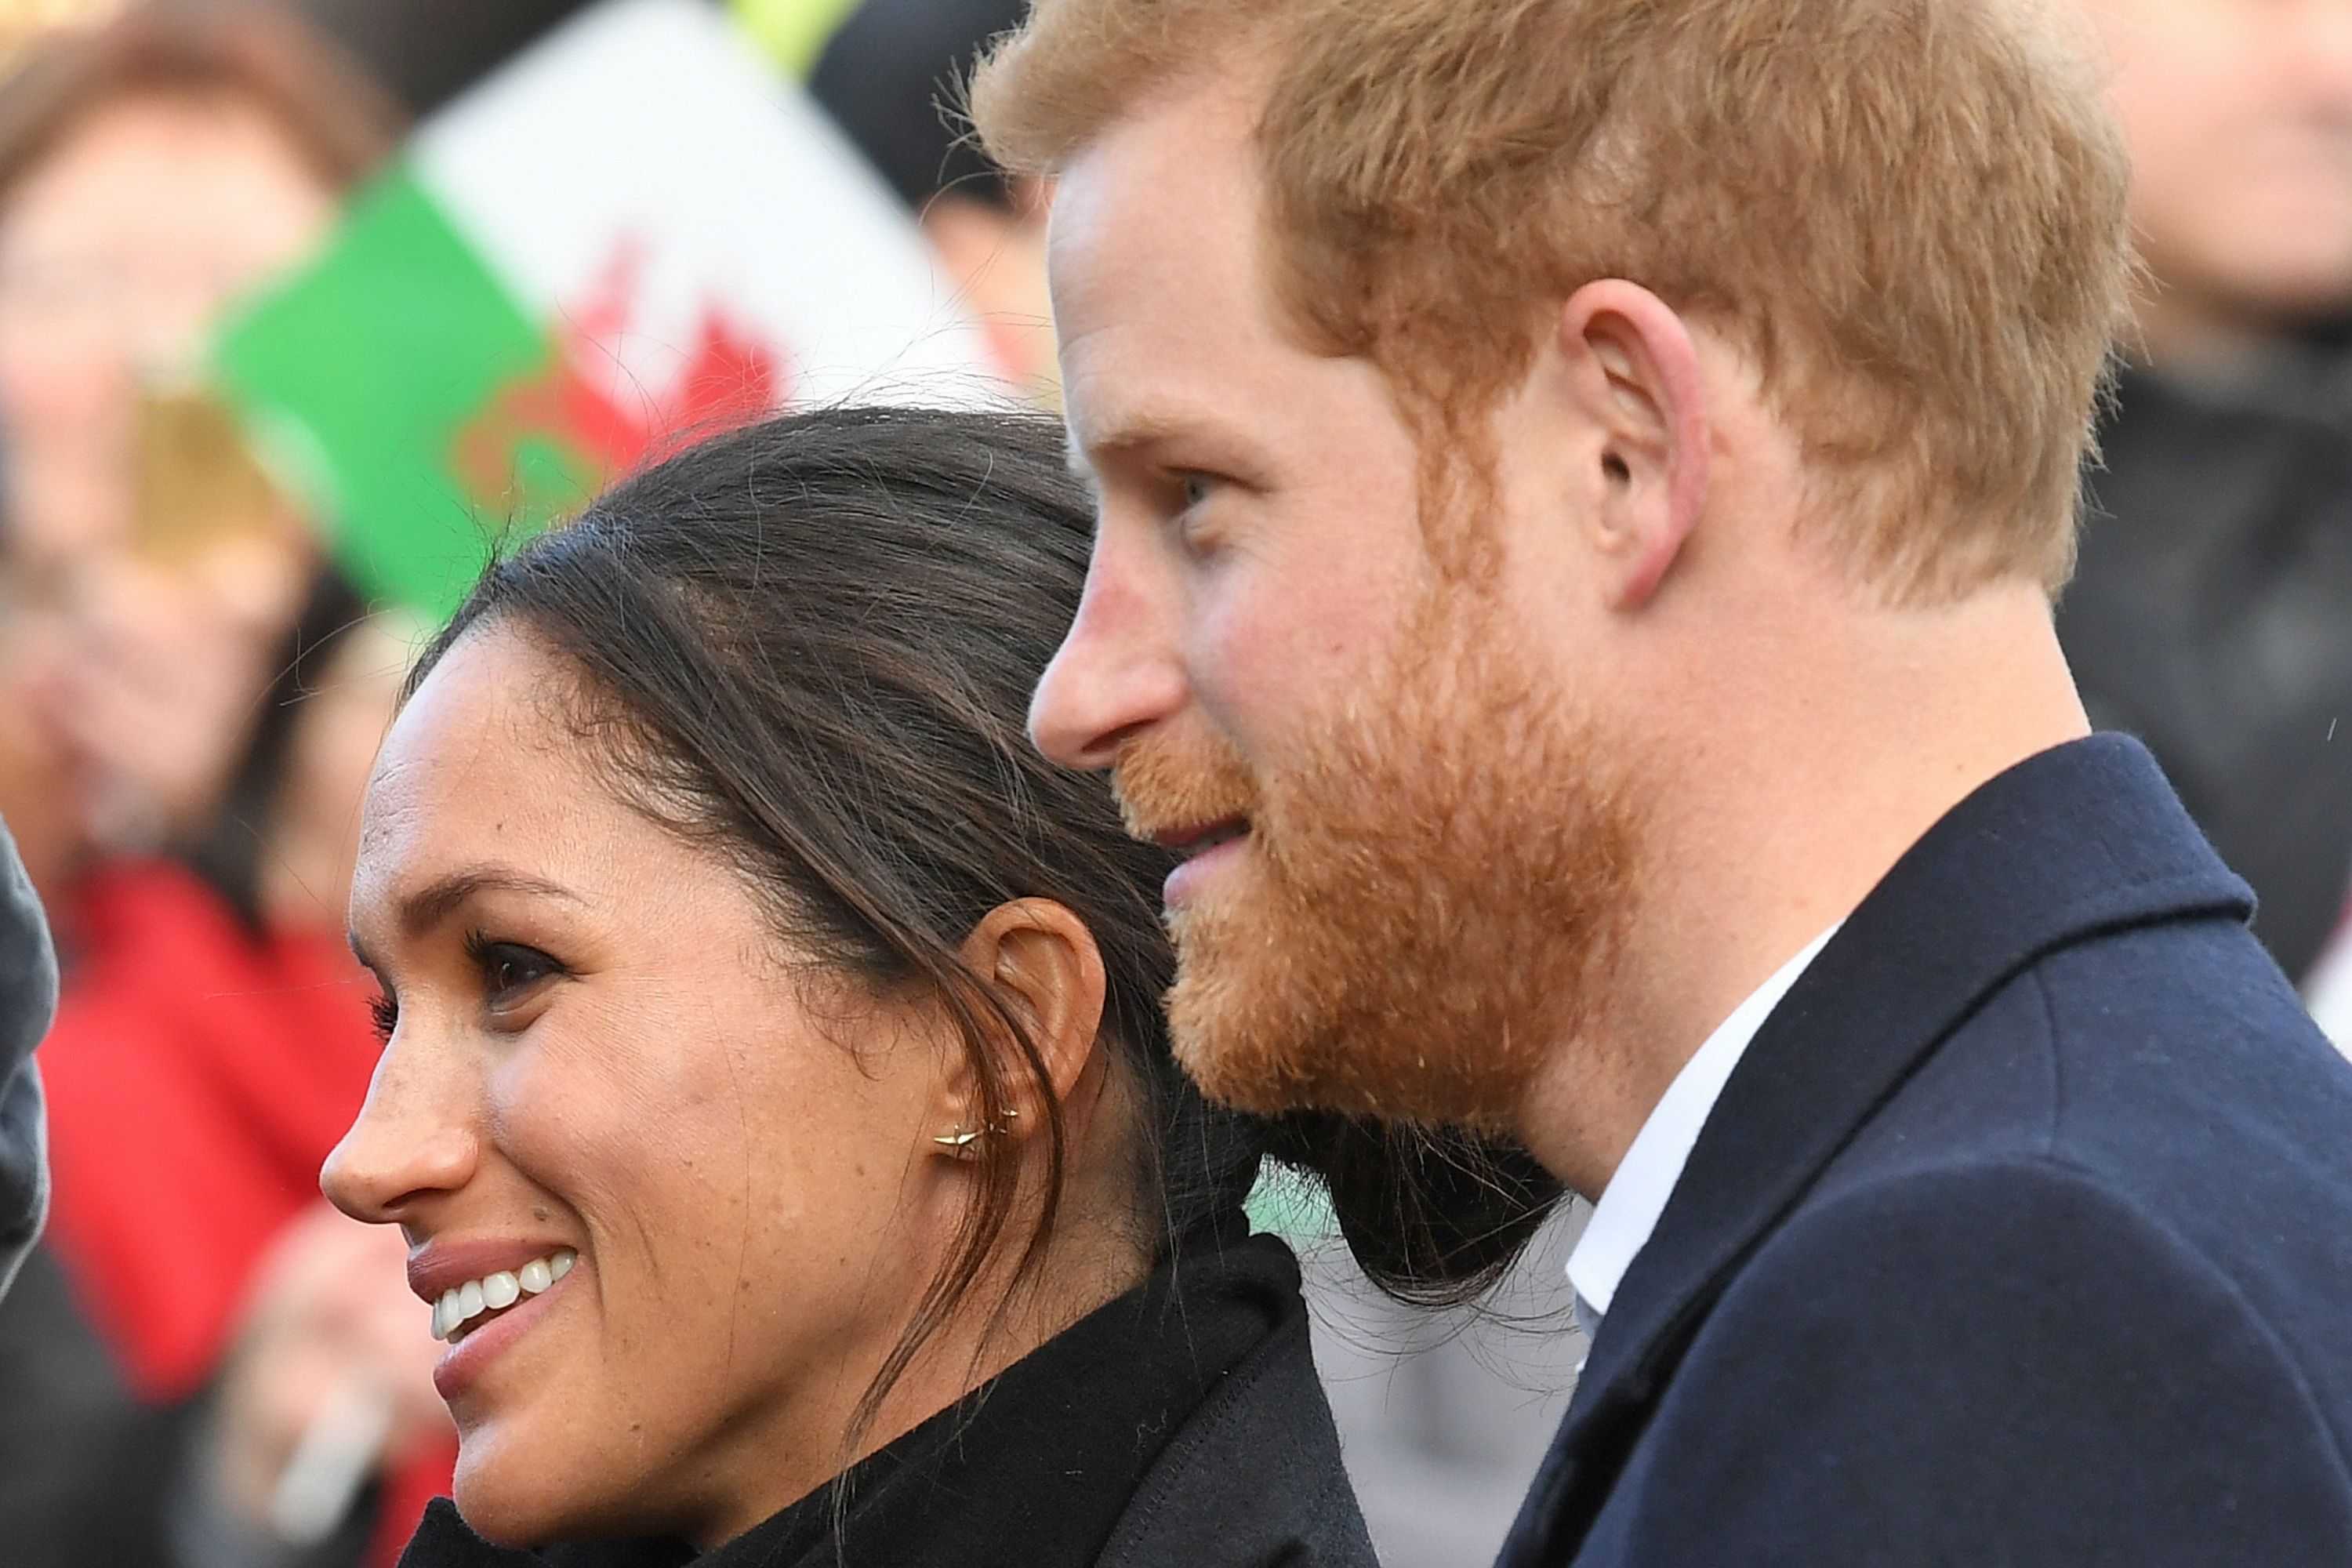 Coverage of Meghan and Harry 'knowingly monetises hatred' - Labour MP